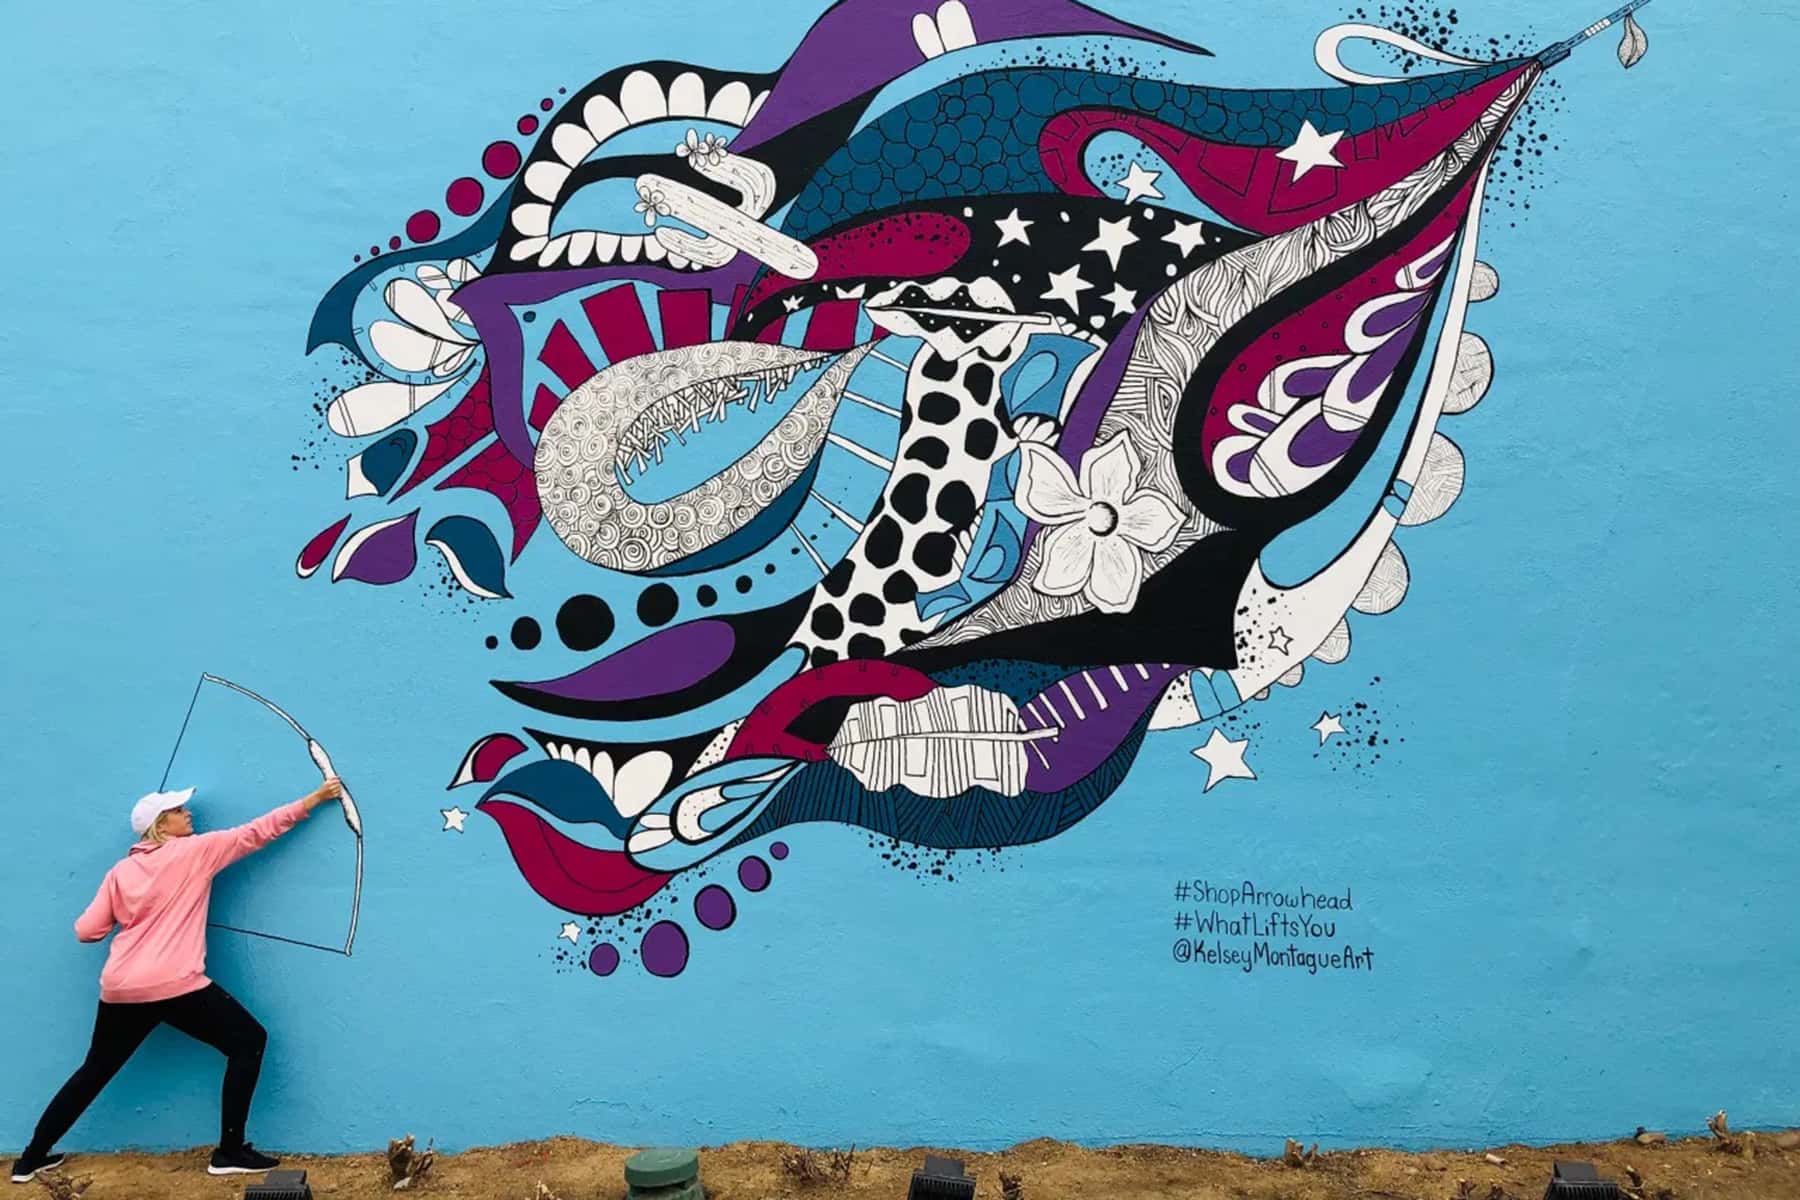 Sharpie® Partners with Street Artist Kelsey Montague to Inspire